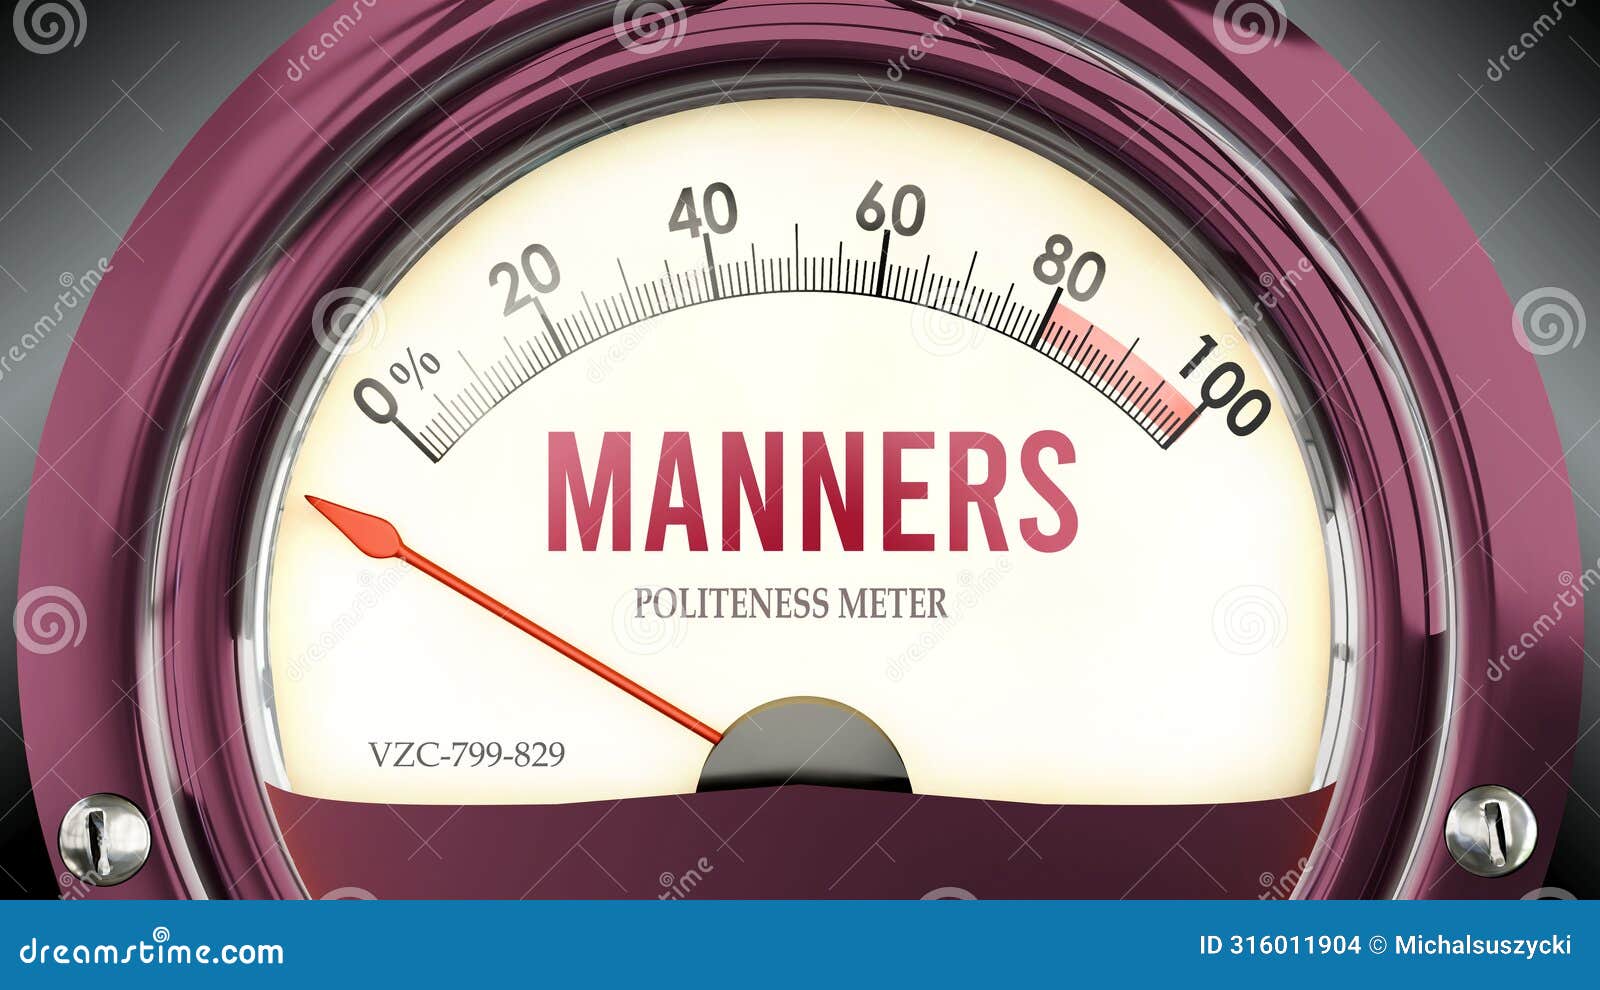 manners and politeness meter that hits less than zero, very low level of manners